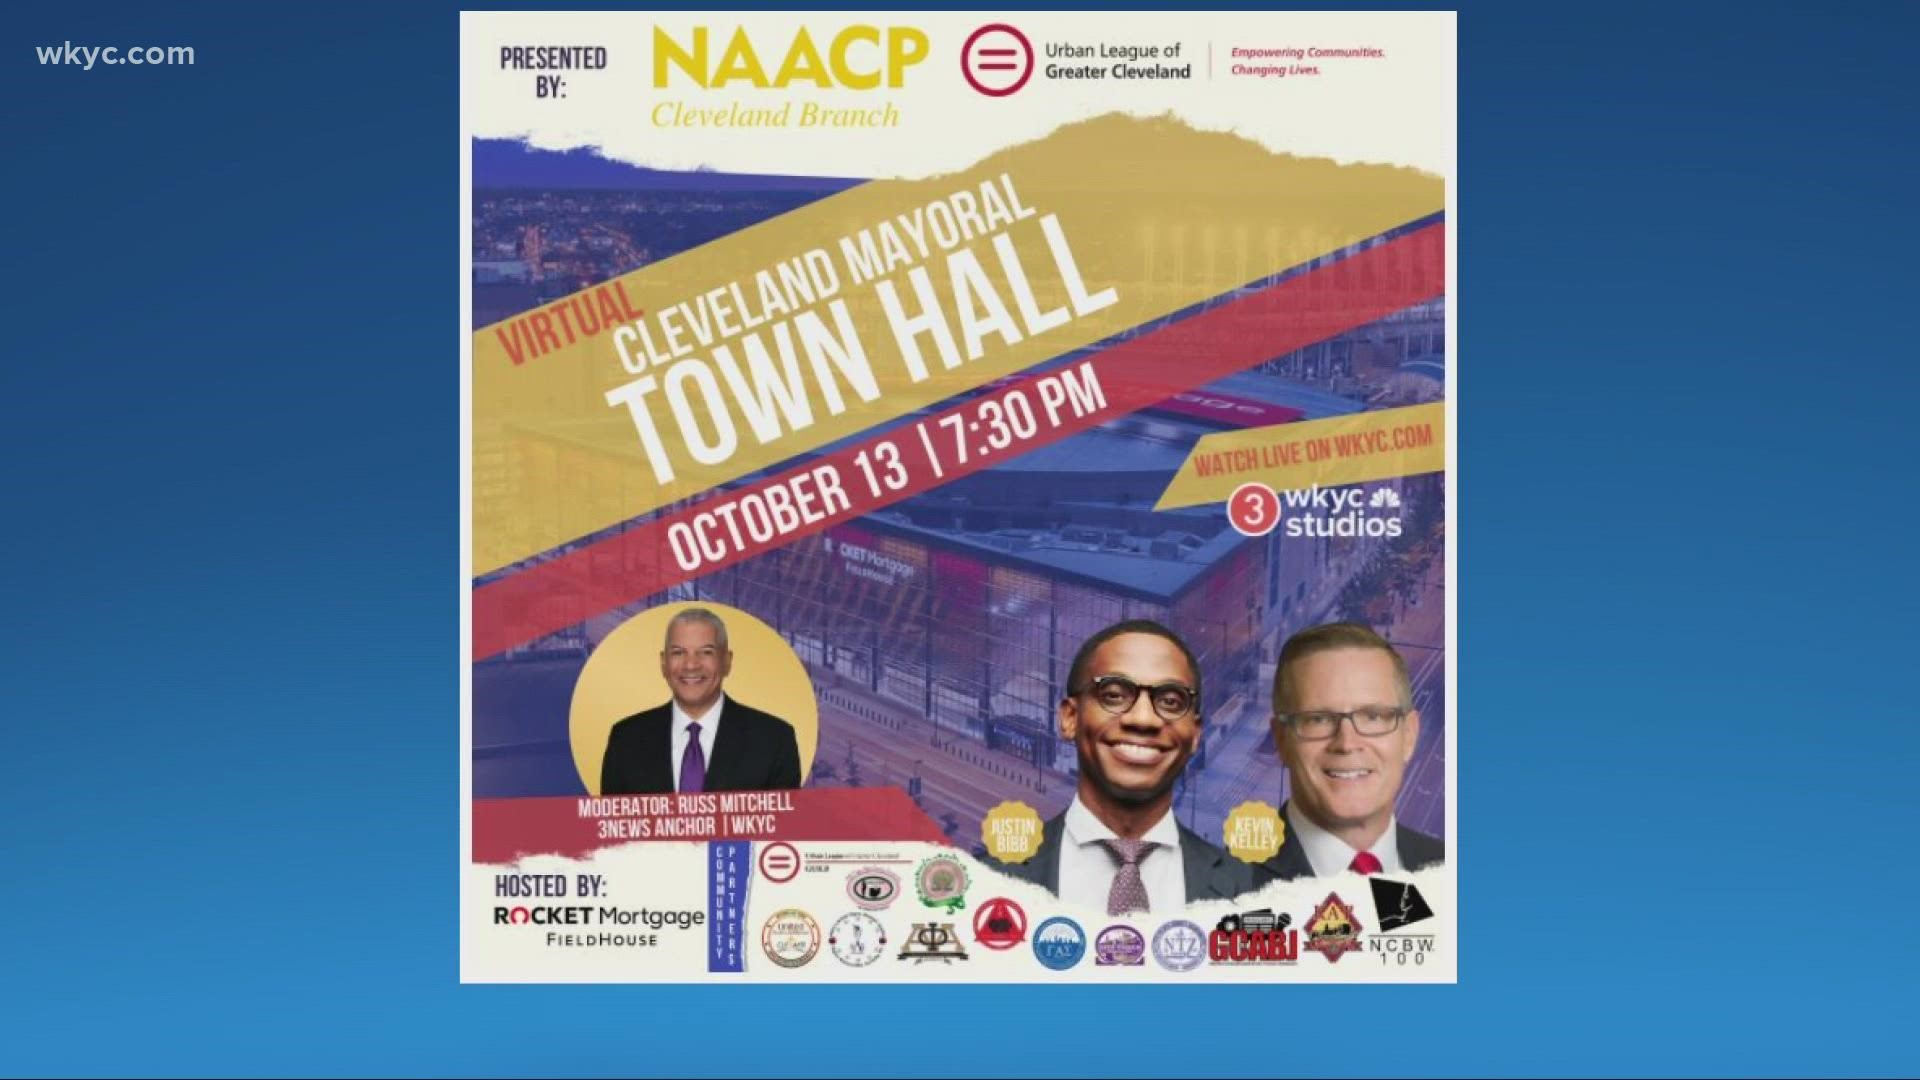 It's now less than 3 weeks to go until Cleveland voters elect a new mayor, and tonight the candidates will go at it again in a town hall.